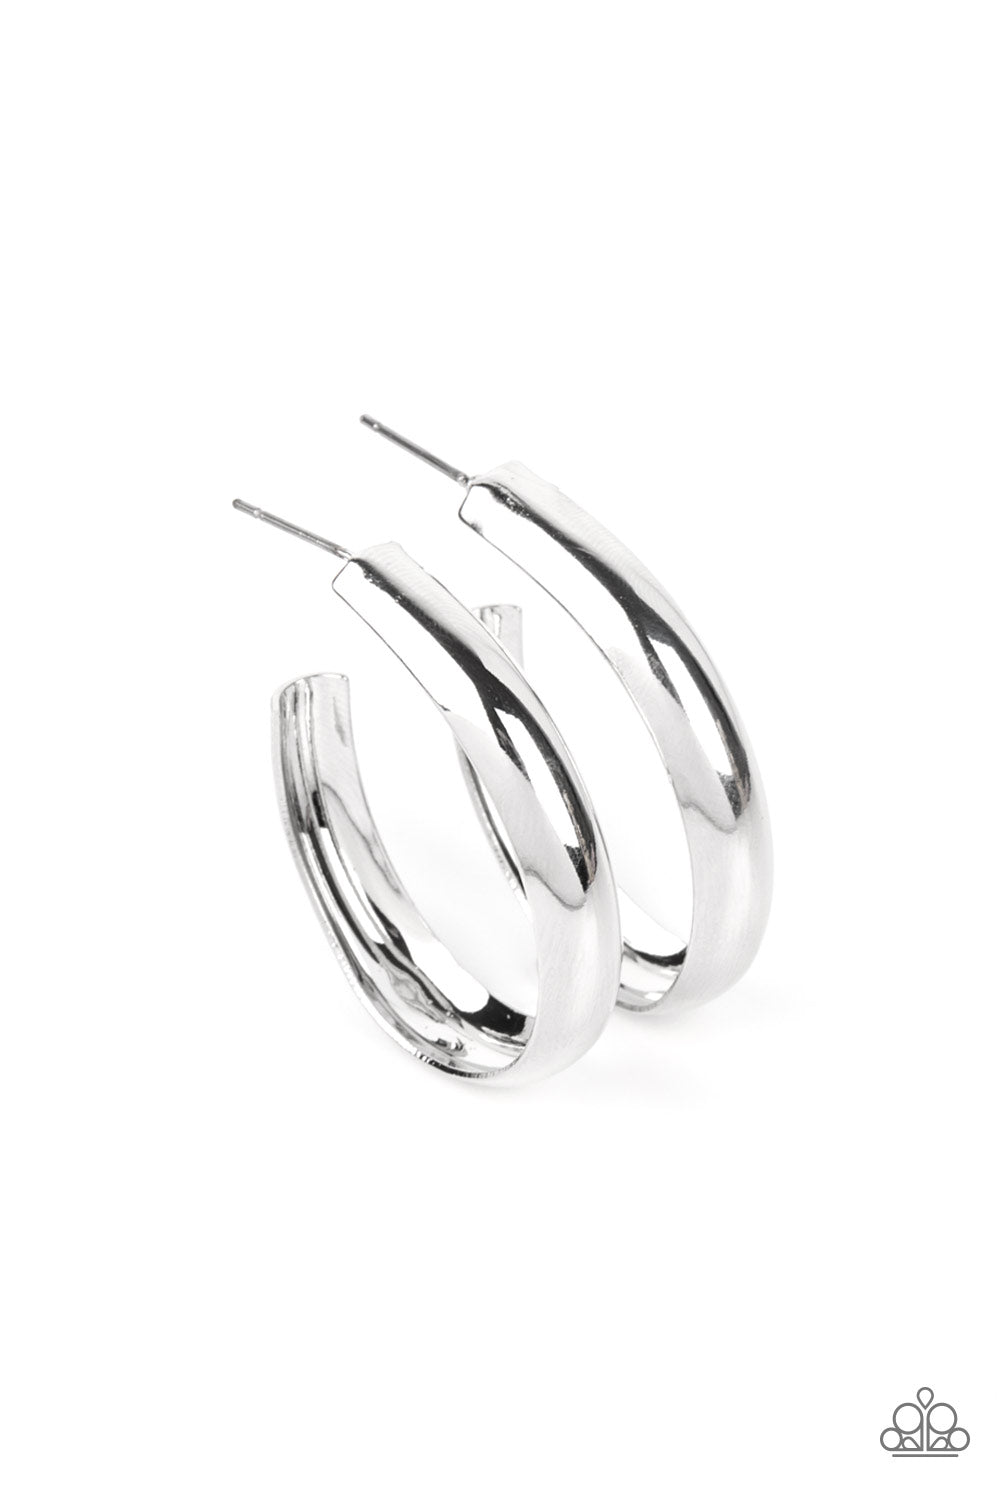 Champion Curves - Silver Hoop Earrings - Paparazzi Accessories - Alies Bling Bar